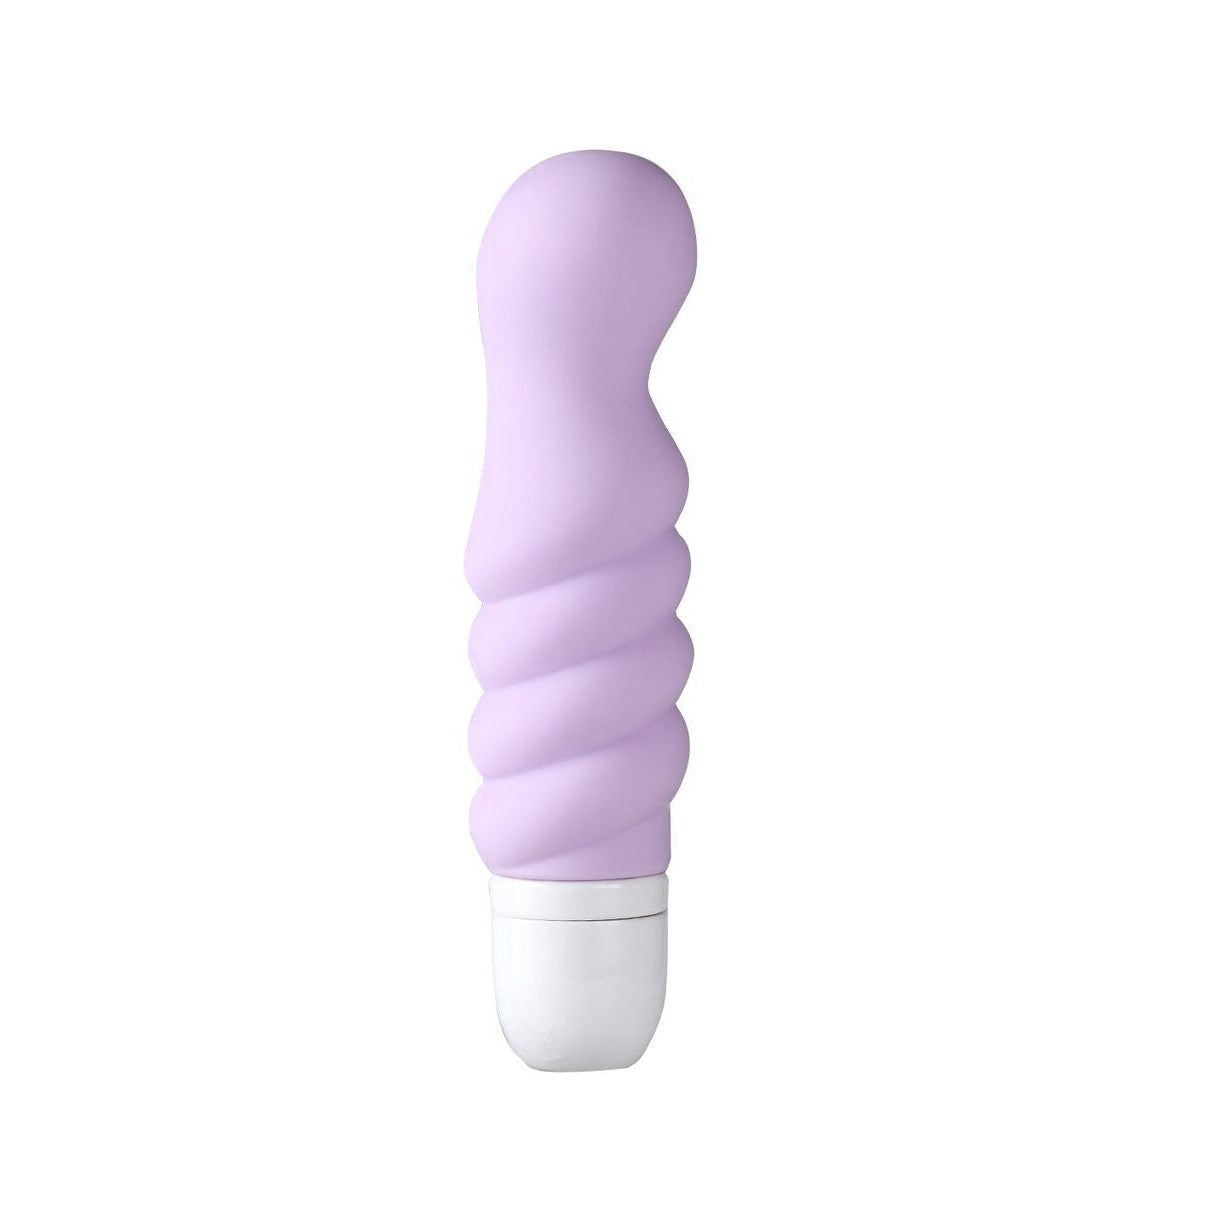 Chloe Silicone G Spot Lavender Intimates Adult Boutique